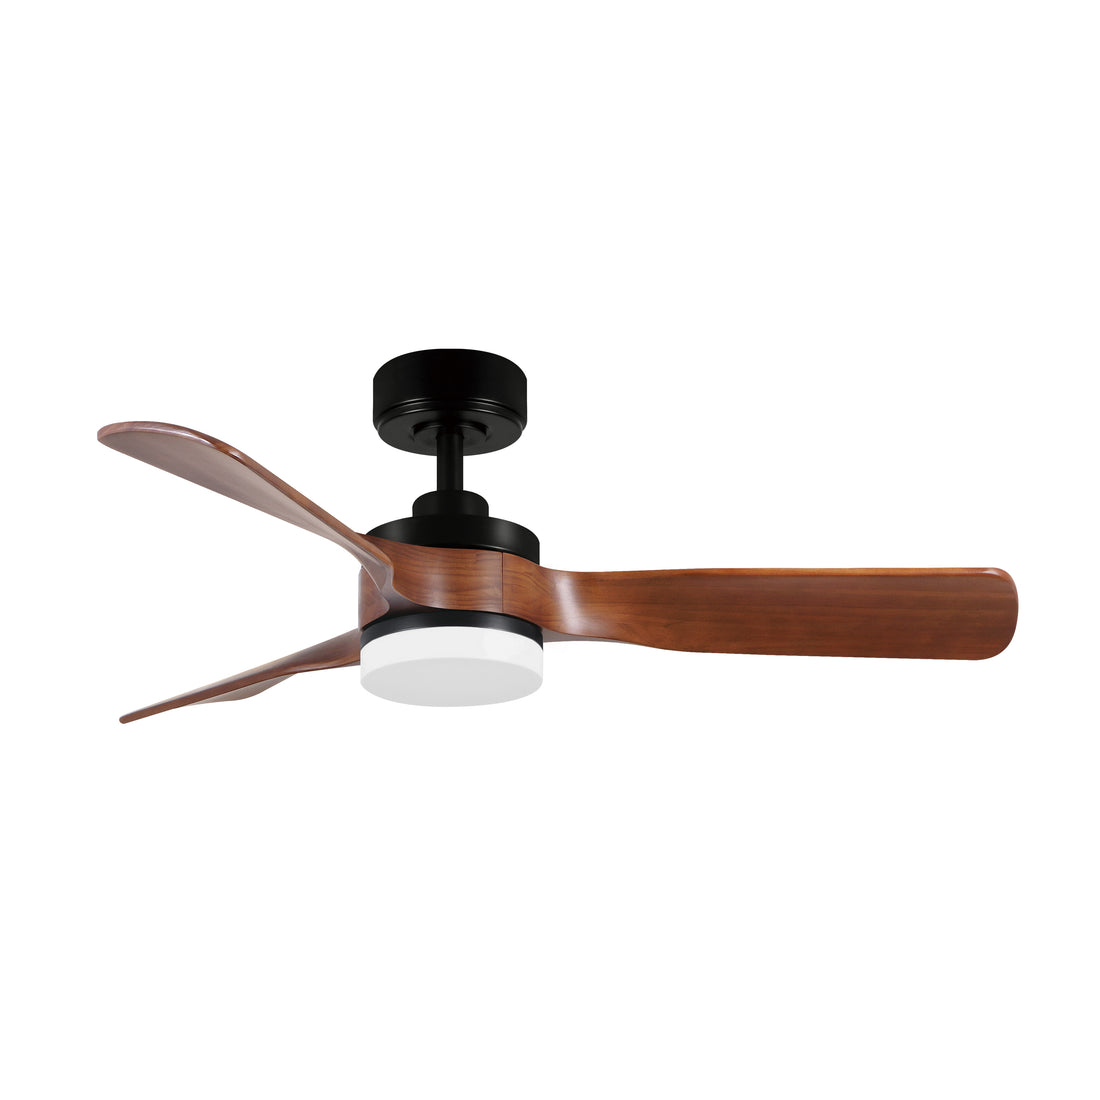 CEILING FAN CHRIS D112 CM BLACK METAL AND WOOD LED 19W CCT DIMMABLE 3 BLADES